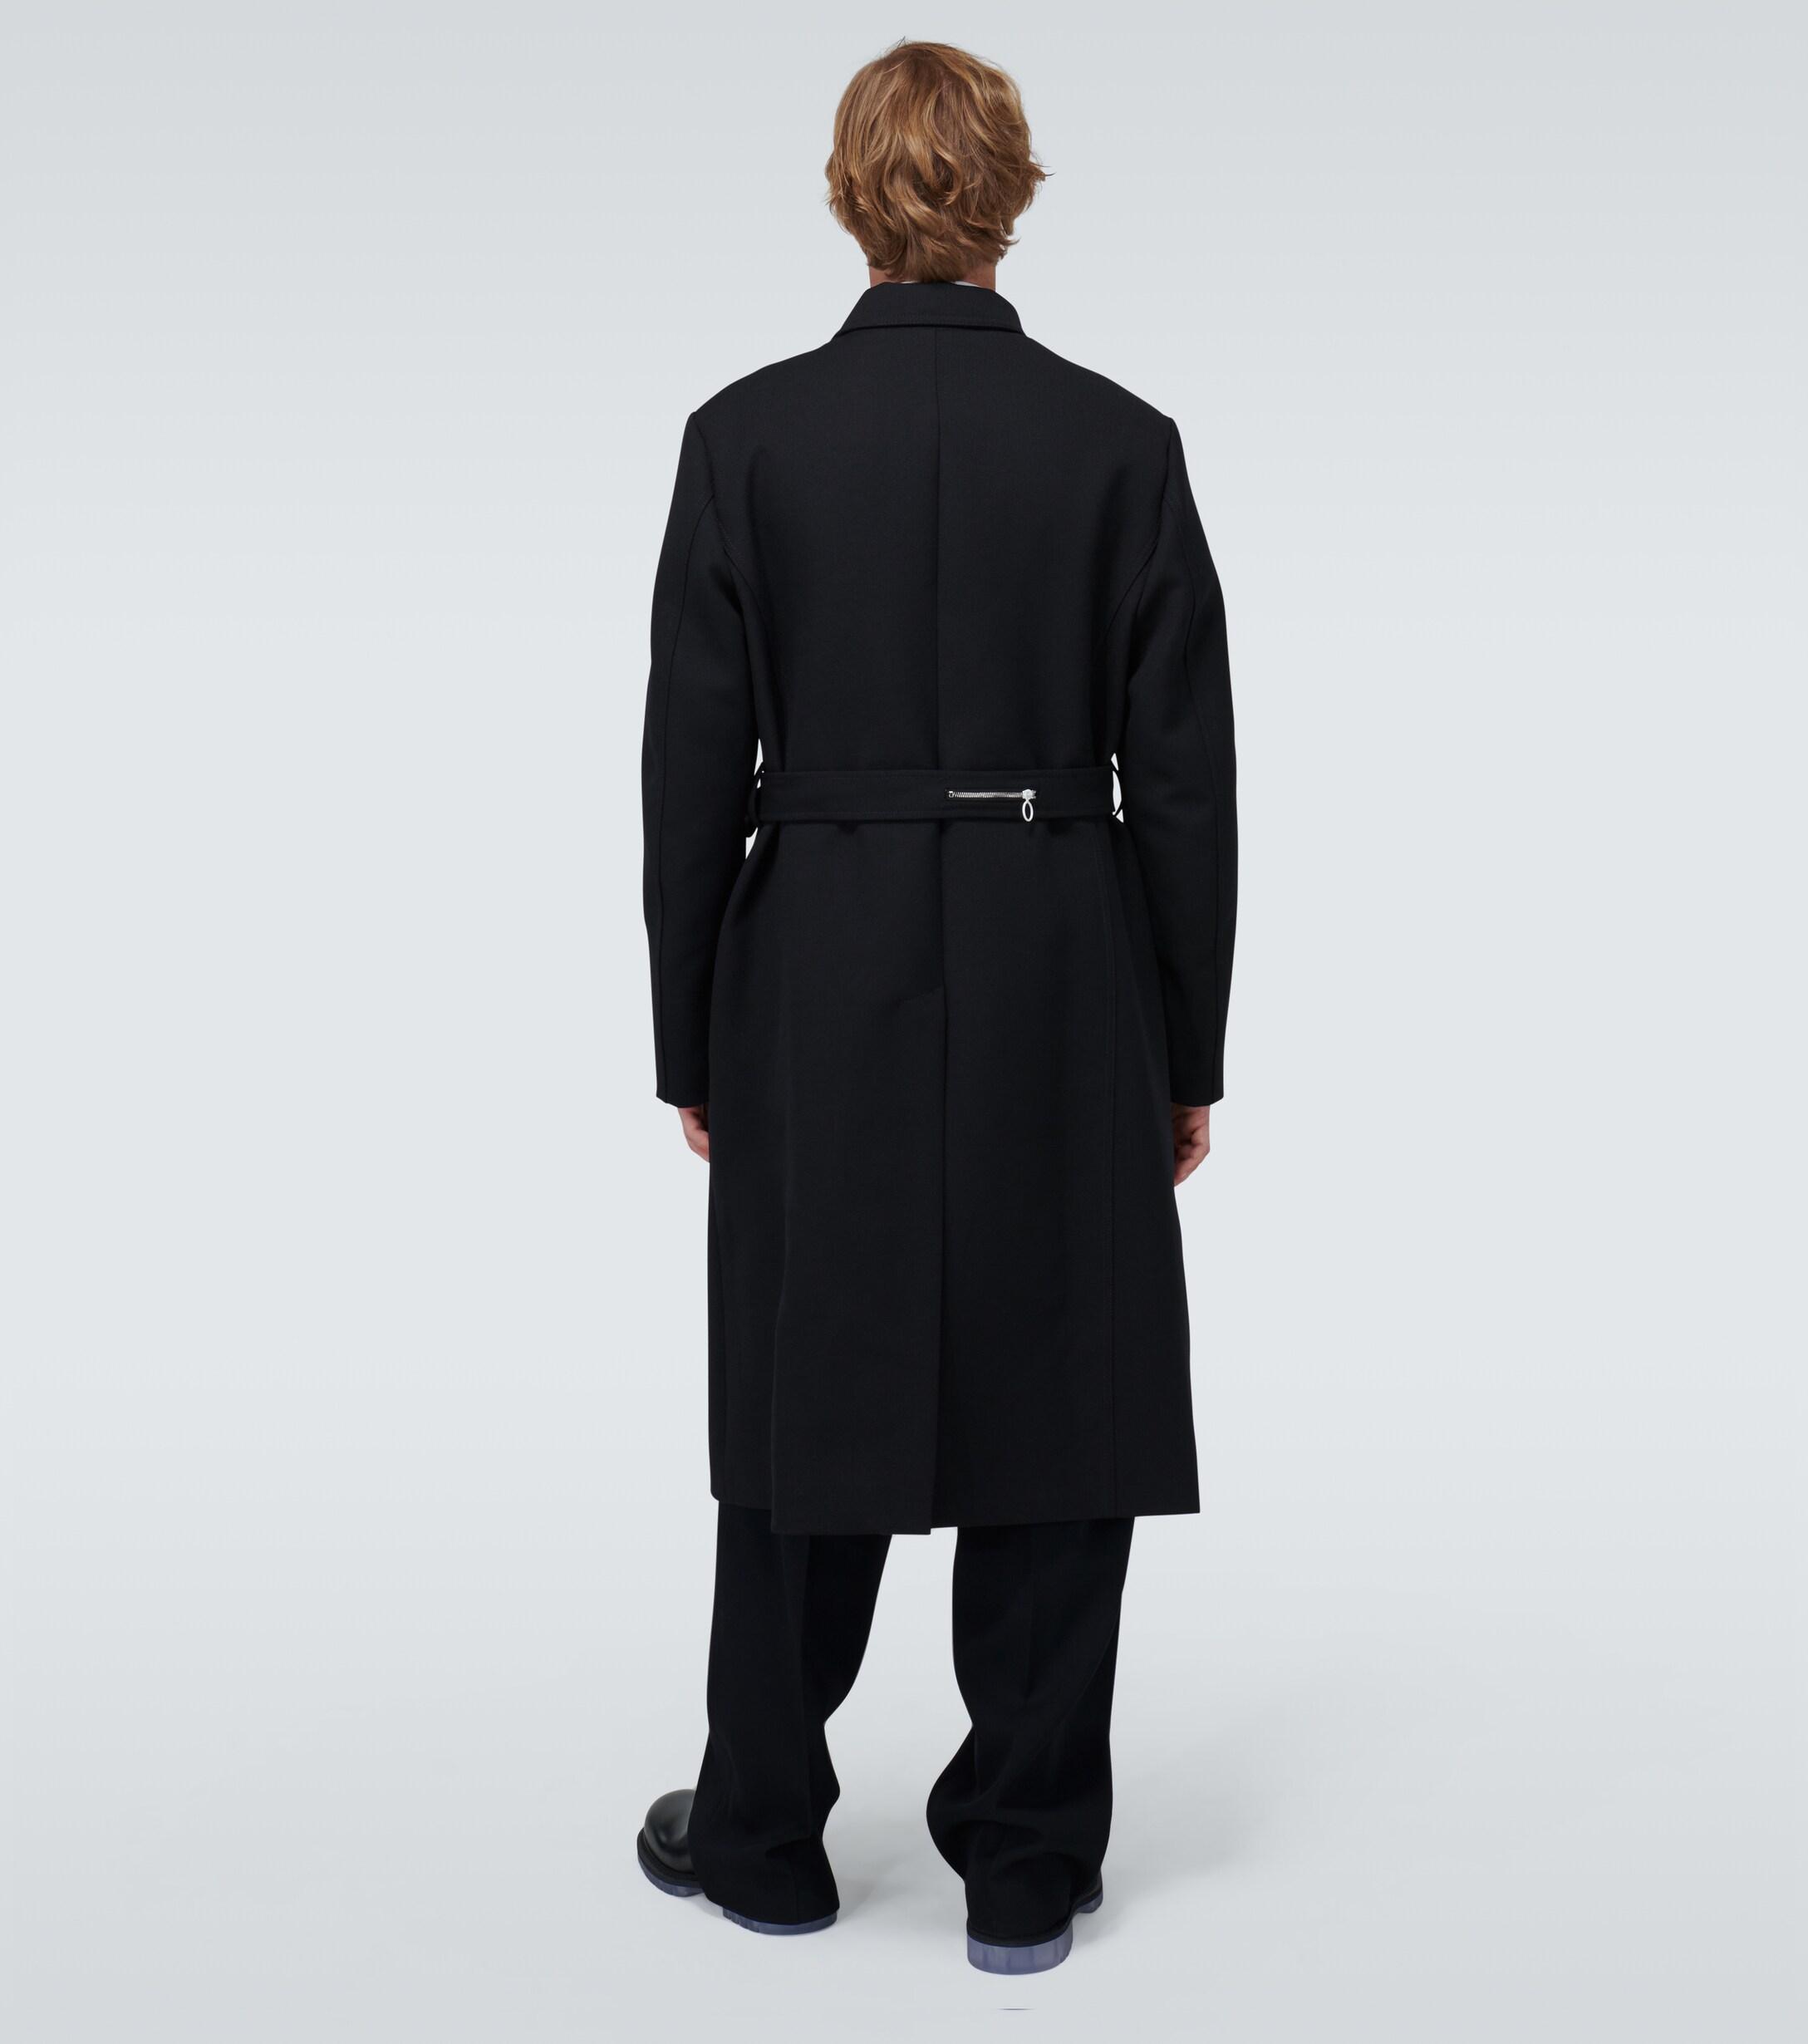 Raf Simons Slim-fit Wool Trench Coat in Blue for Men - Lyst